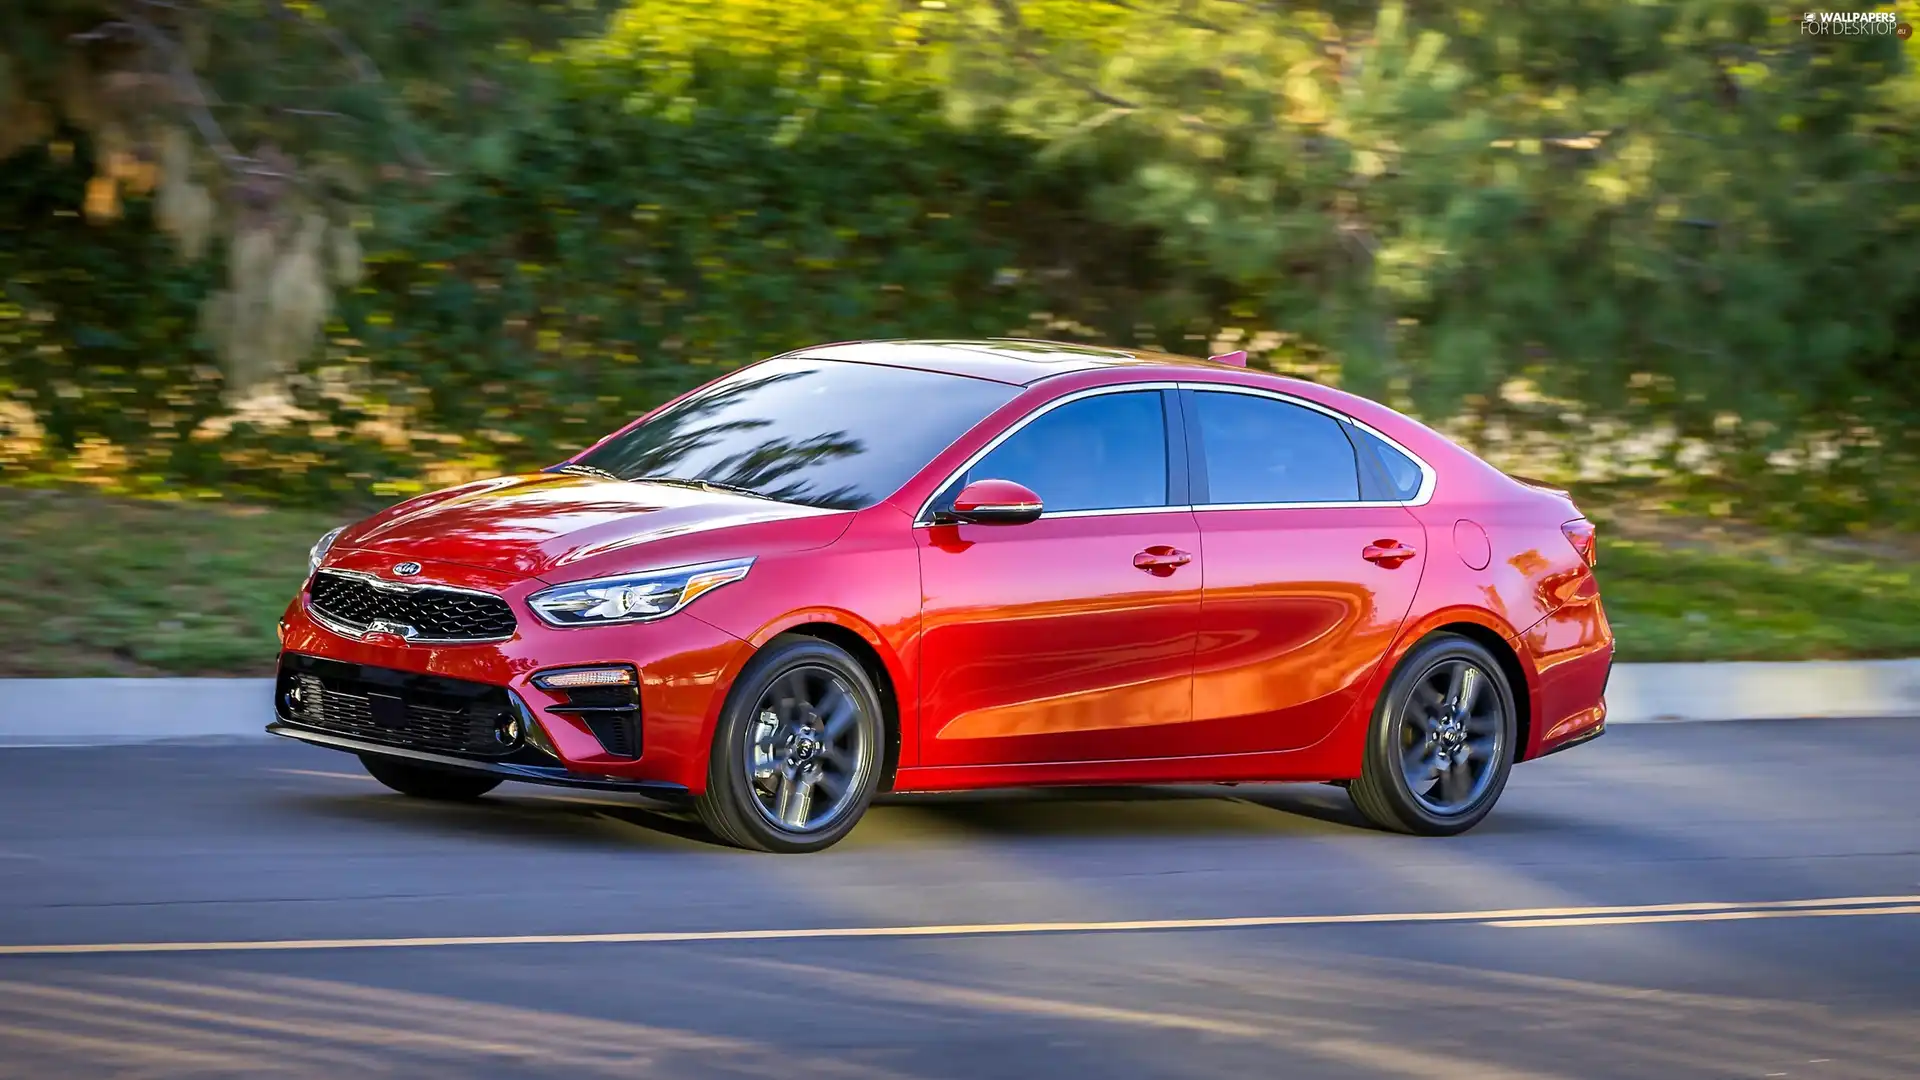 red hot, 2019, side, Kia Forte - For desktop wallpapers: 2560x1440